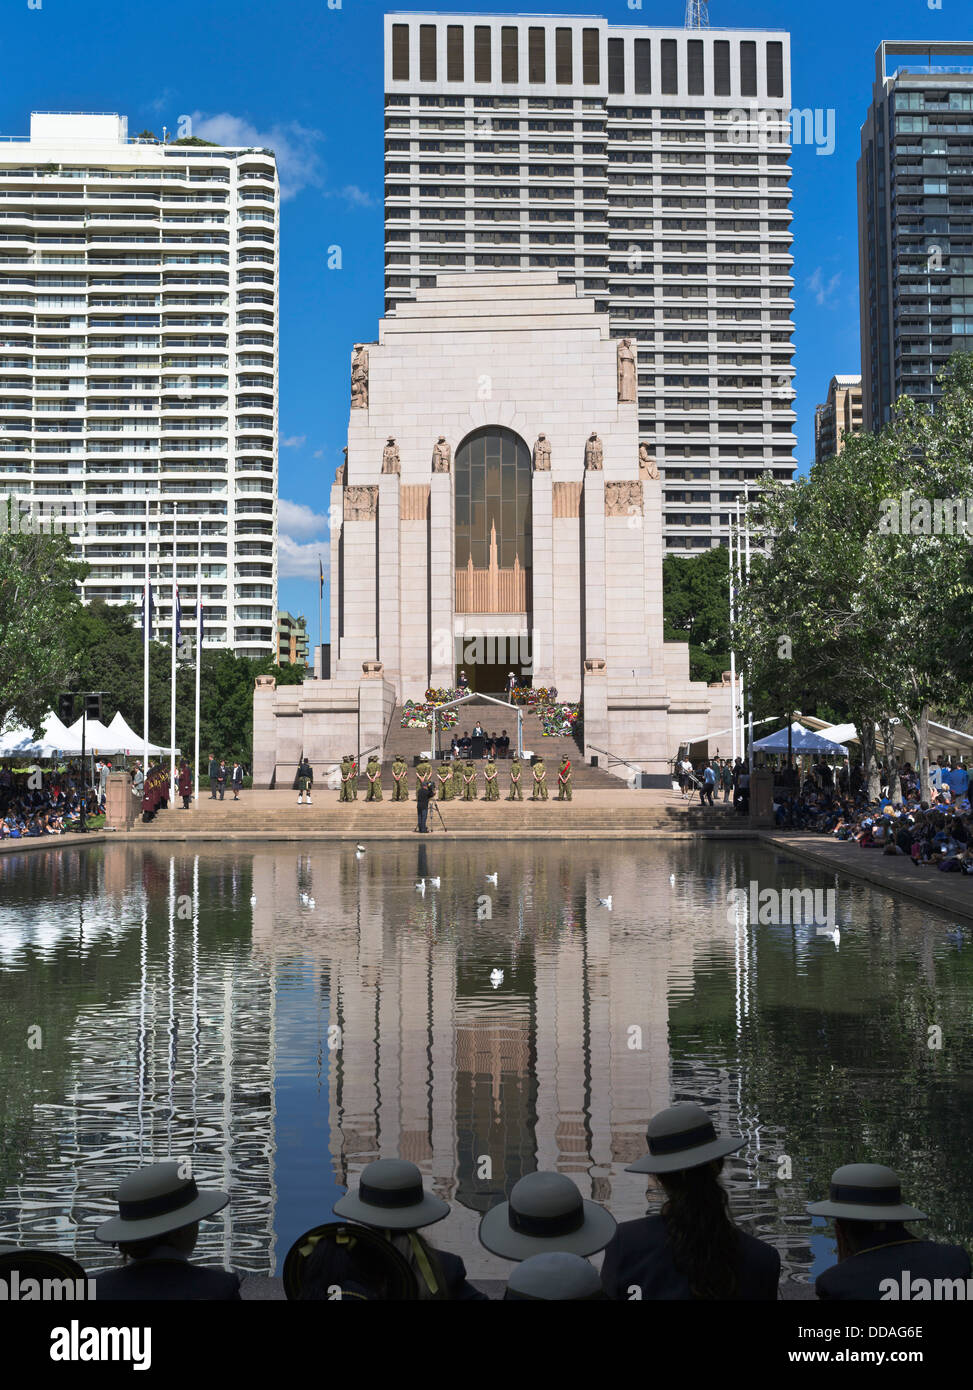 dh ANZAC Memorial Pool SYDNEY HYDE PARK AUSTRALIA NSW RSL and Schools Remember of Reflections school children group Stock Photo